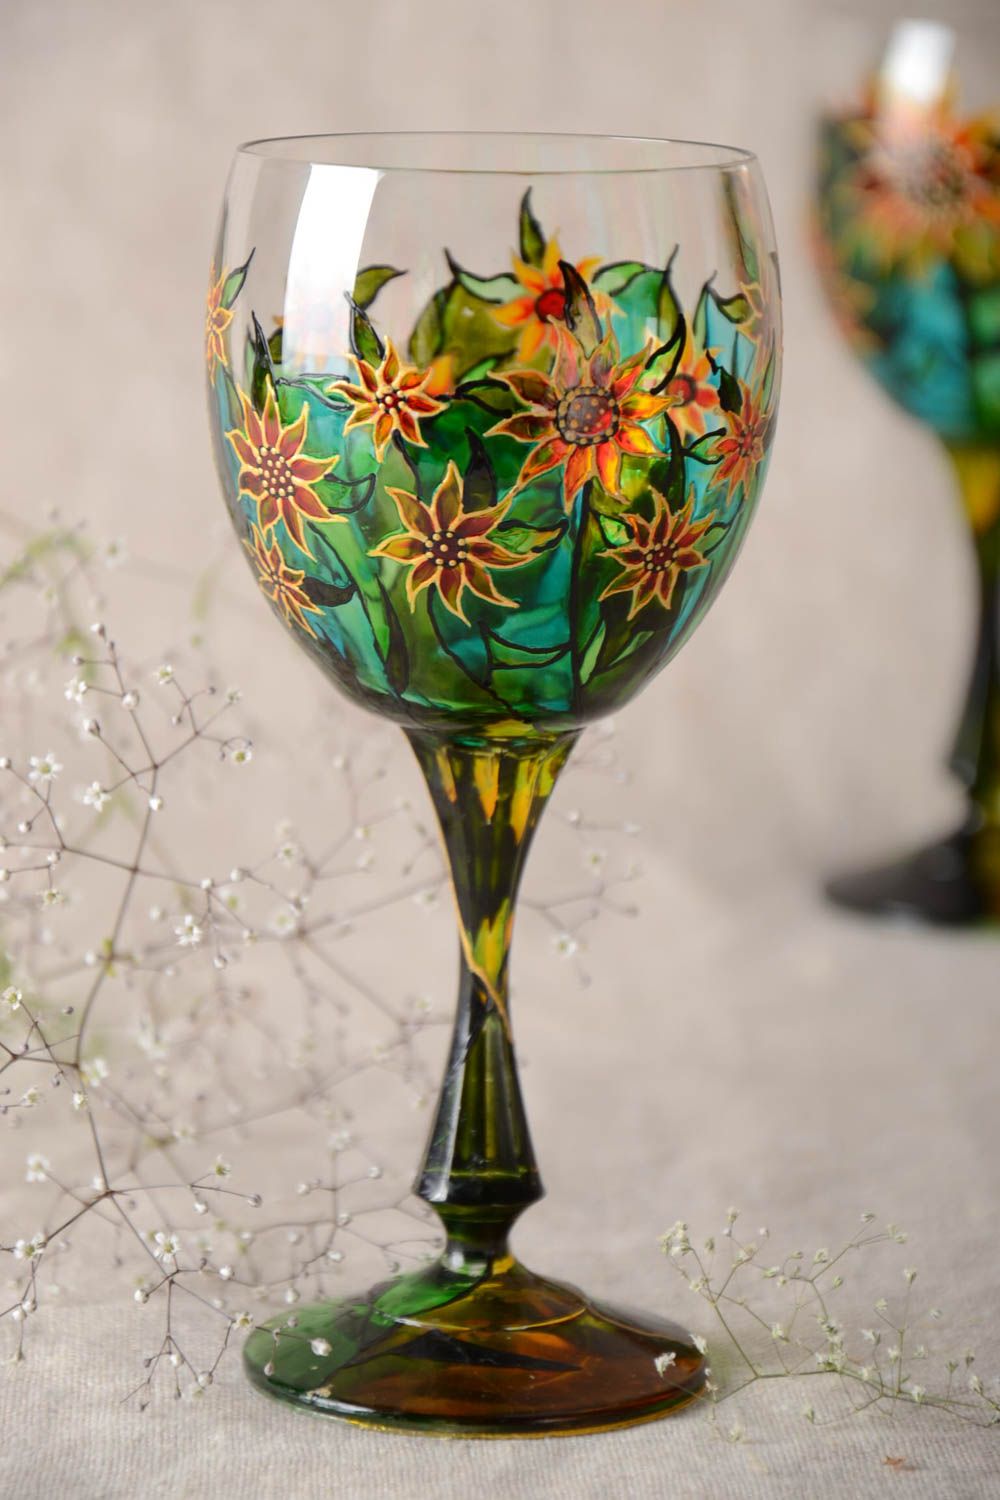 Painted wine glass wine goblets 300 ml handmade drinking glass cool gift ideas photo 1